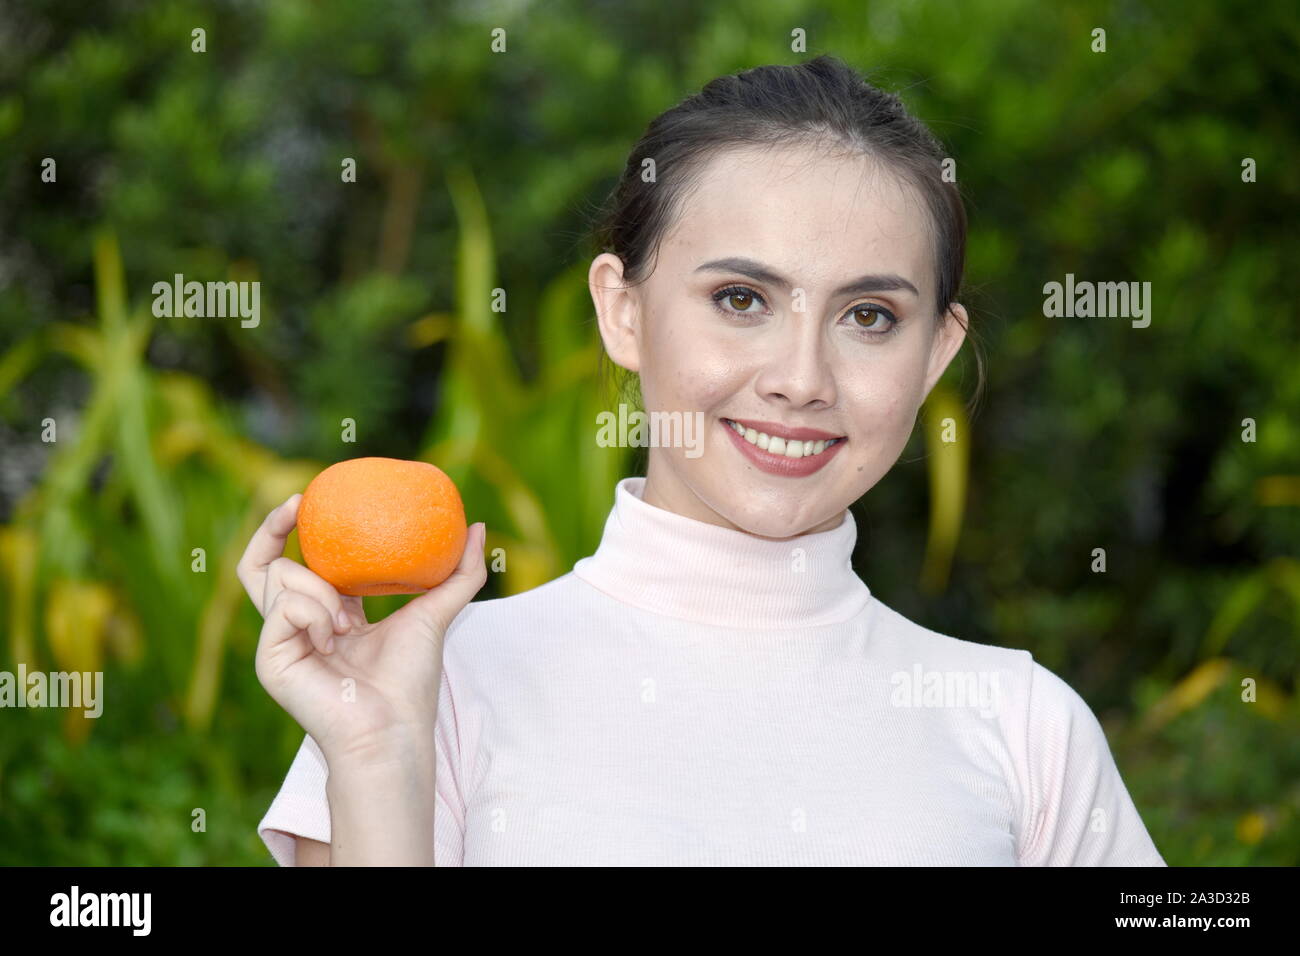 A Happy Young Female With Oranges Stock Photo